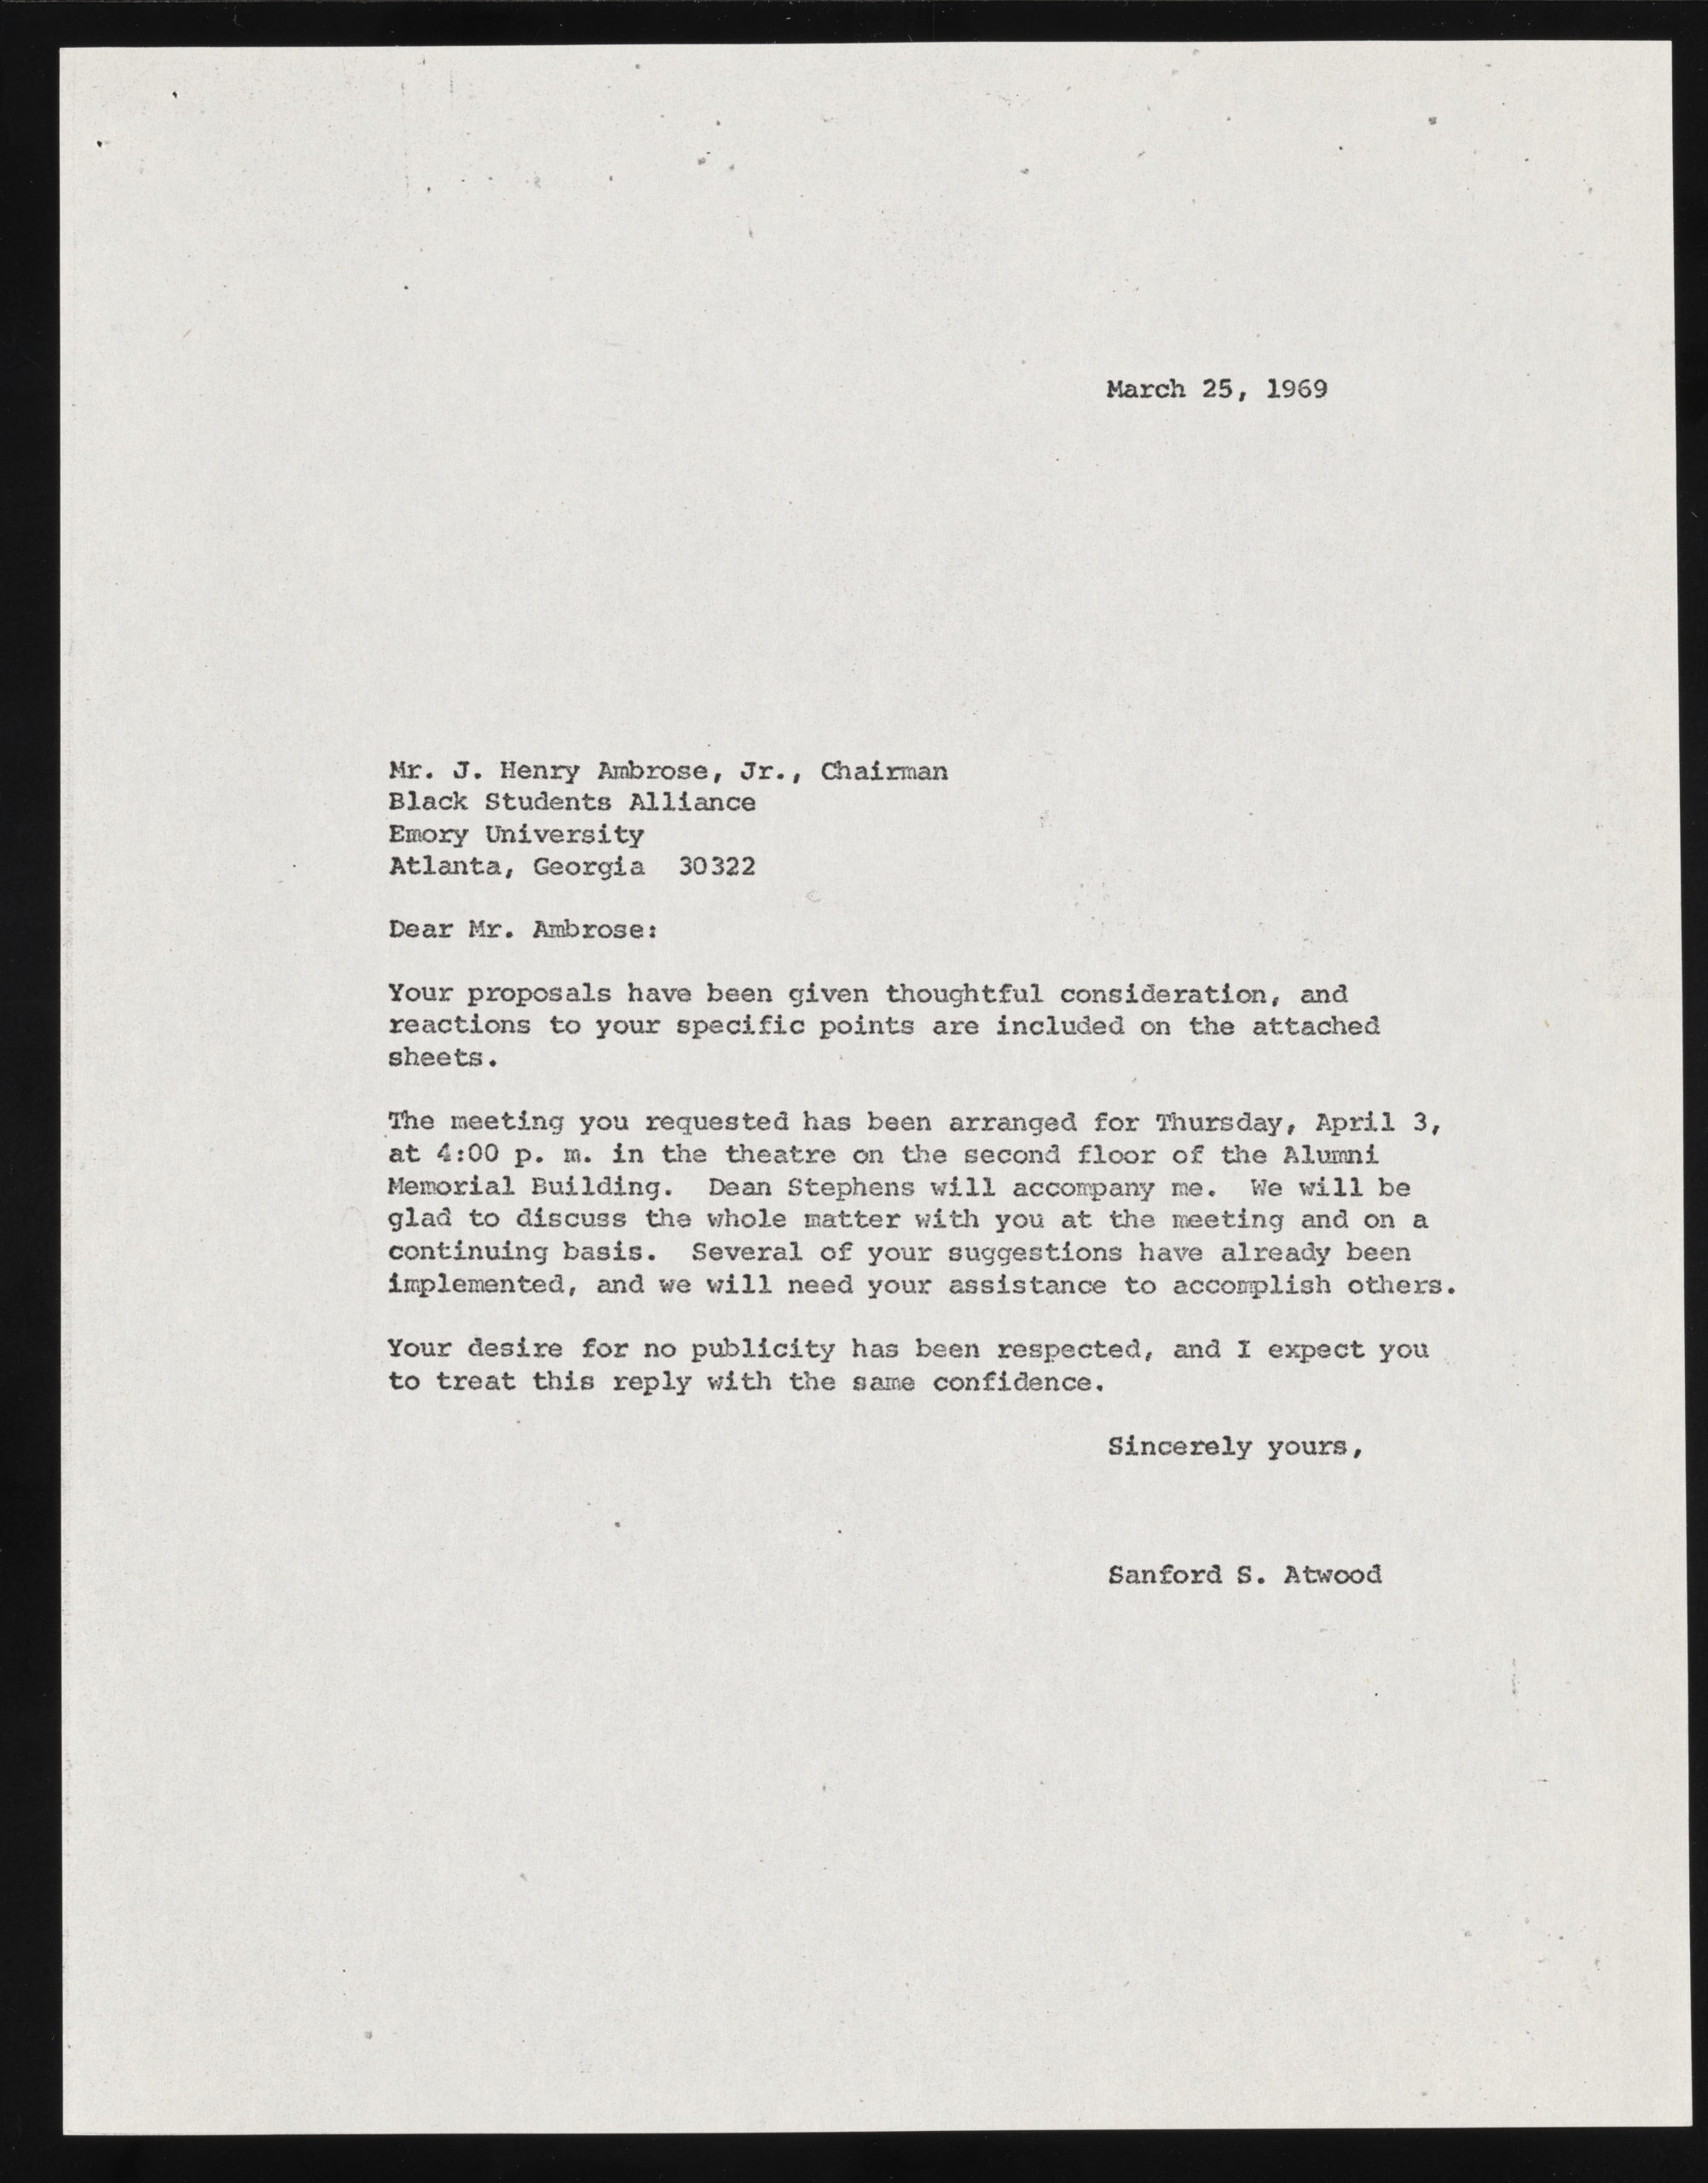 Typed letter from President Atwood to BSA Chair Ambrose responding to BSA proposals